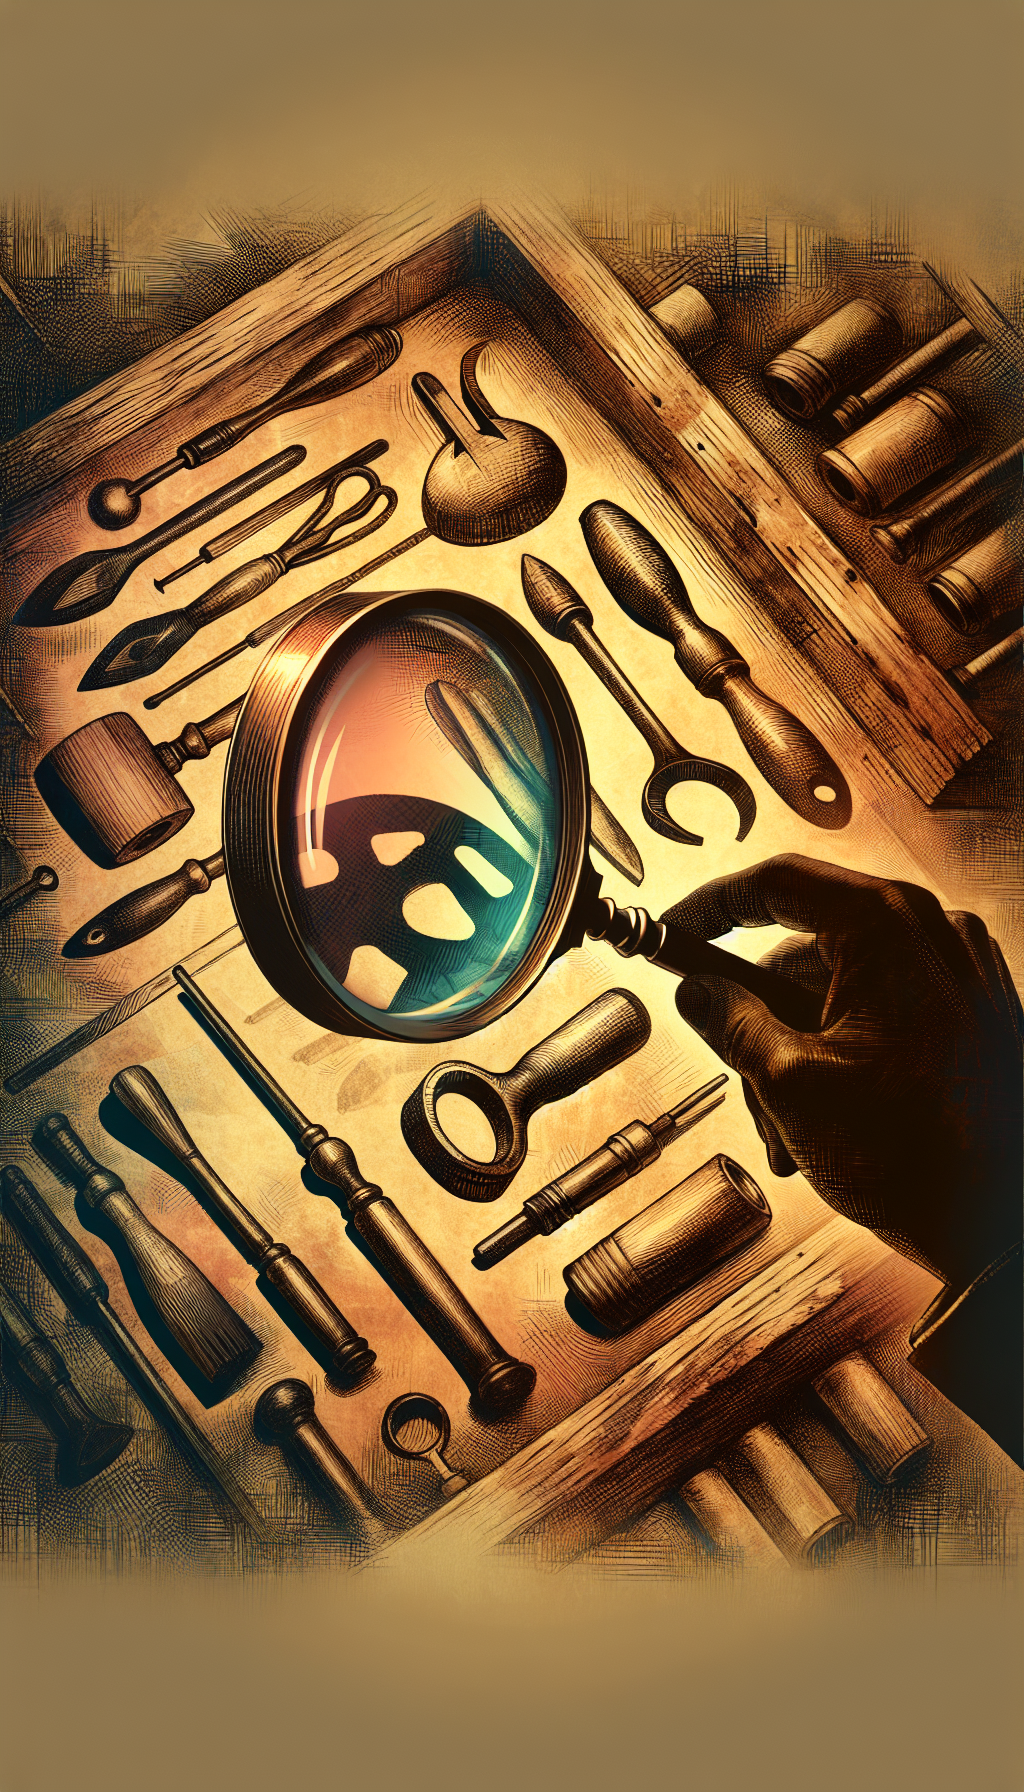 Amidst a sepia-toned workshop backdrop, a magnifying glass hovers over a diverse array of shadowy, antique tools, some partially revealed in vibrant hues, illustrating their unique features and hinting at their mysterious functions. The magnifying glass glows, symbolizing the revelation and identification of ancient craftsmanship secrets, while ghostly outlines of artisans' hands imply the bygone era of their use.